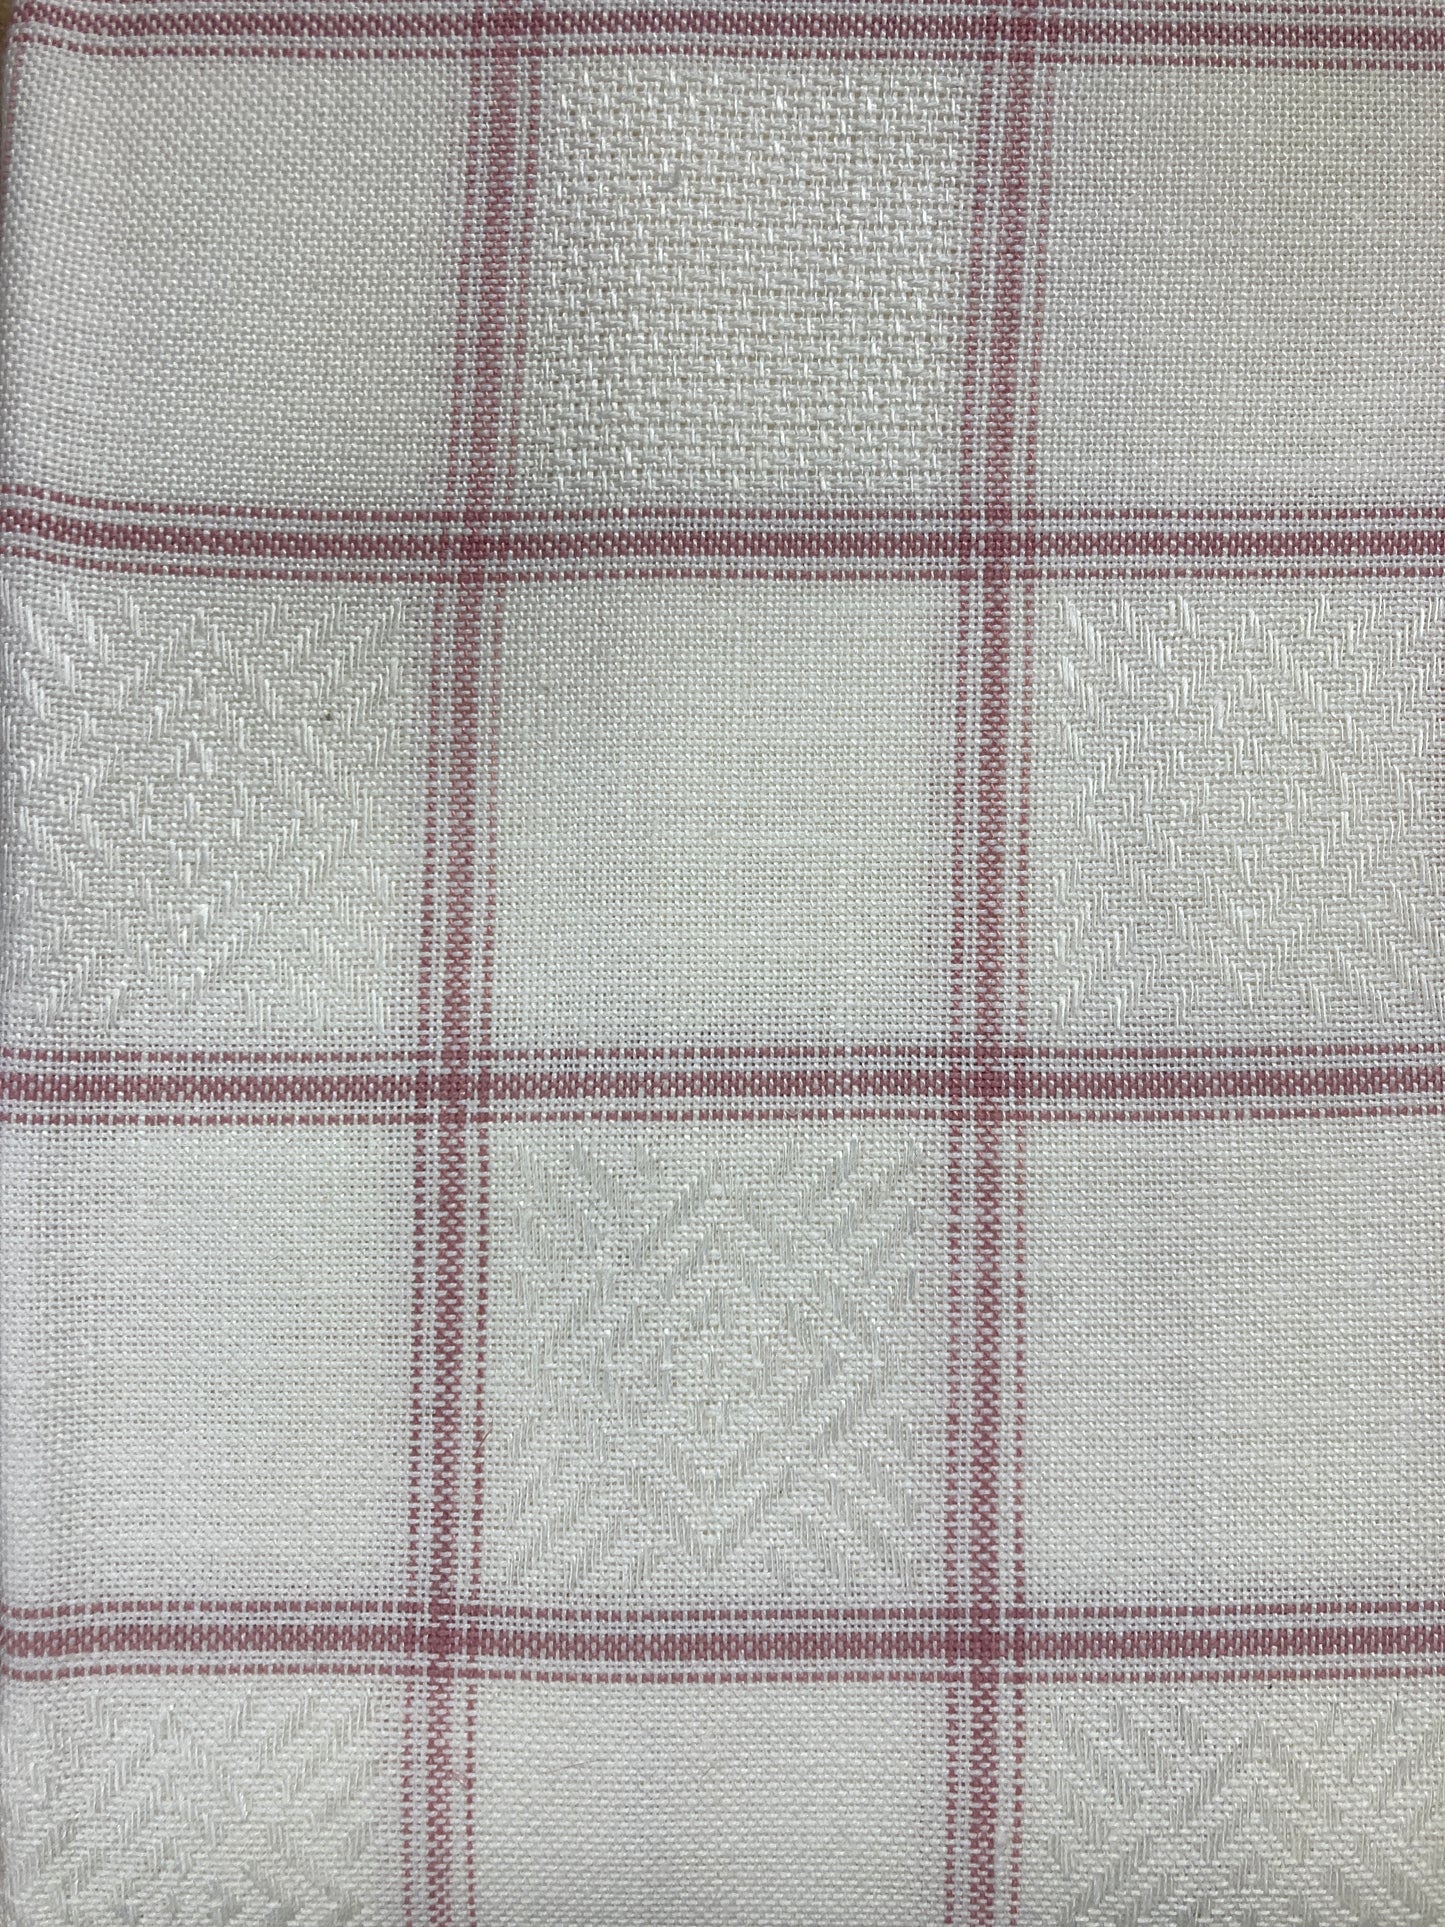 Checked fabric with Aida style squares (Zweigart)